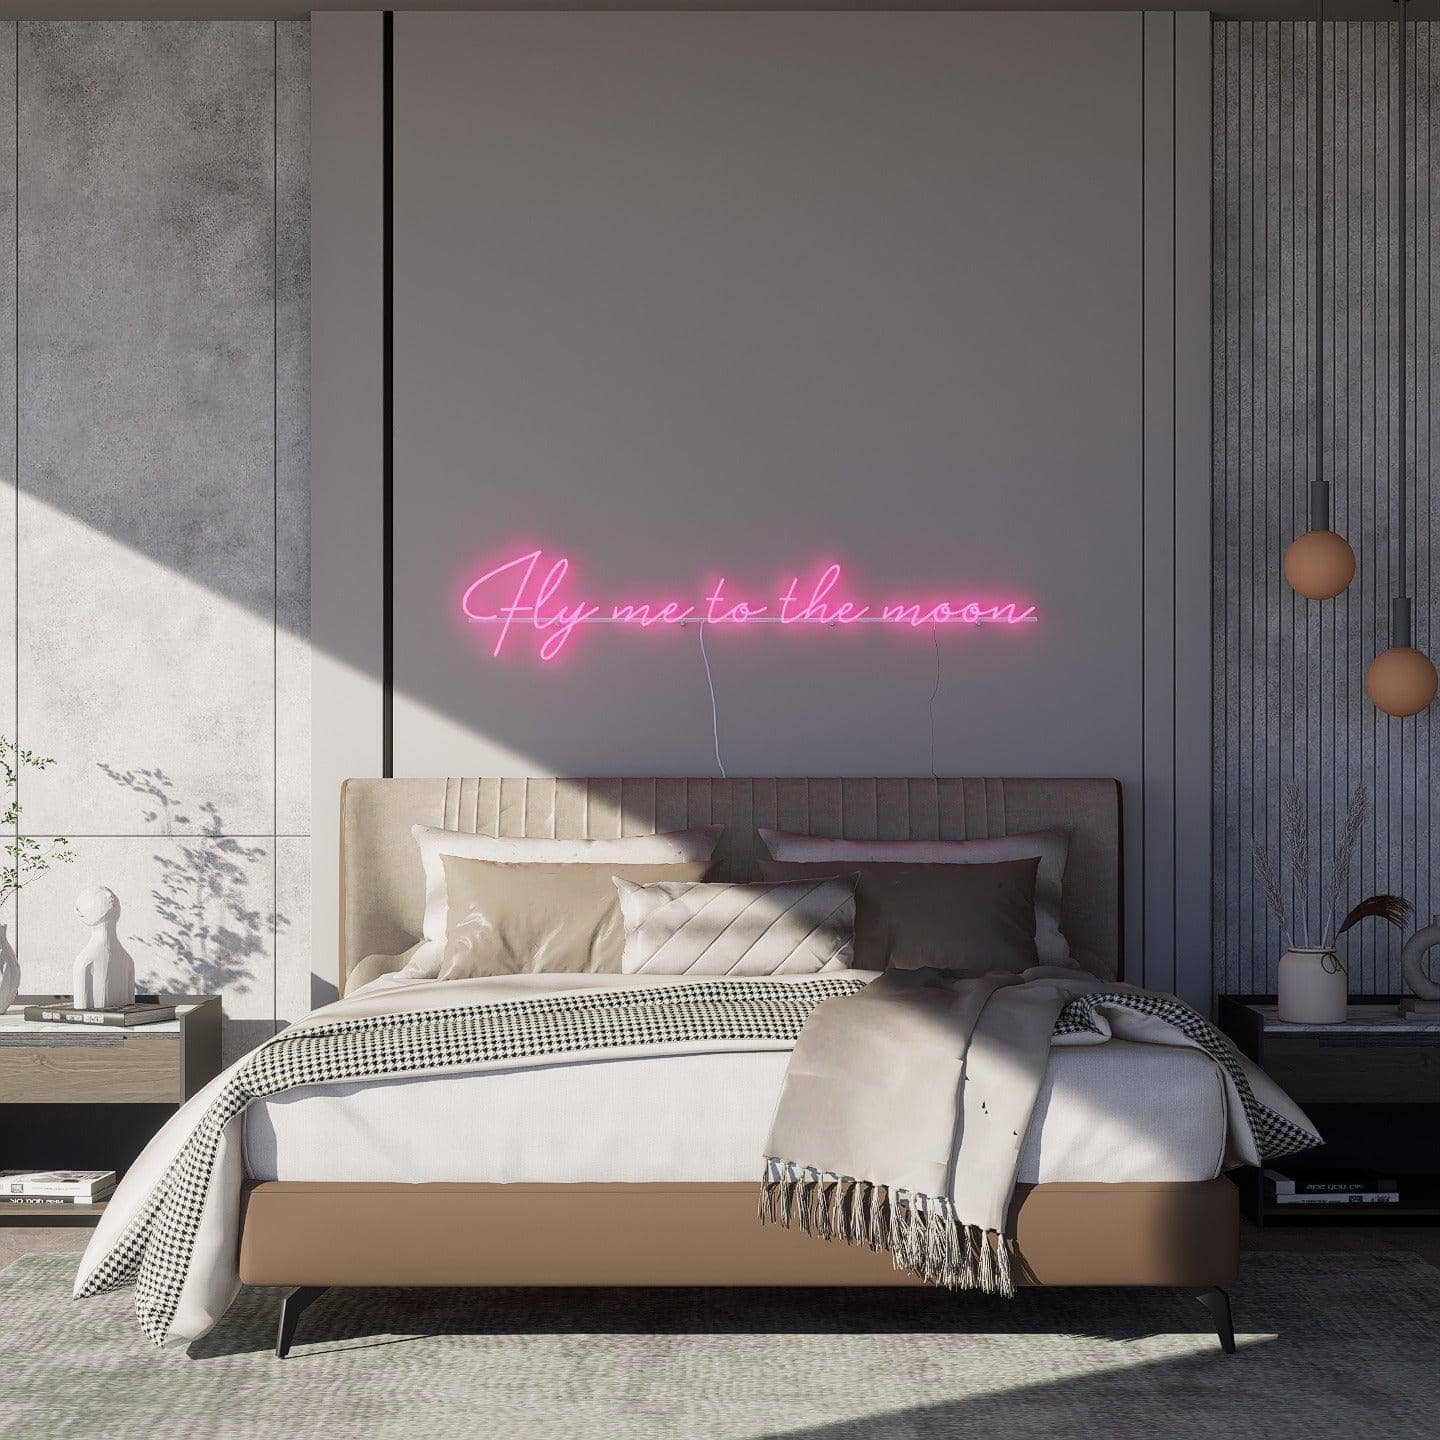 light-up-pink-neon-lights-and-hang-them-in-the-bedroom-during-the-day-fly-me-to-the-moon